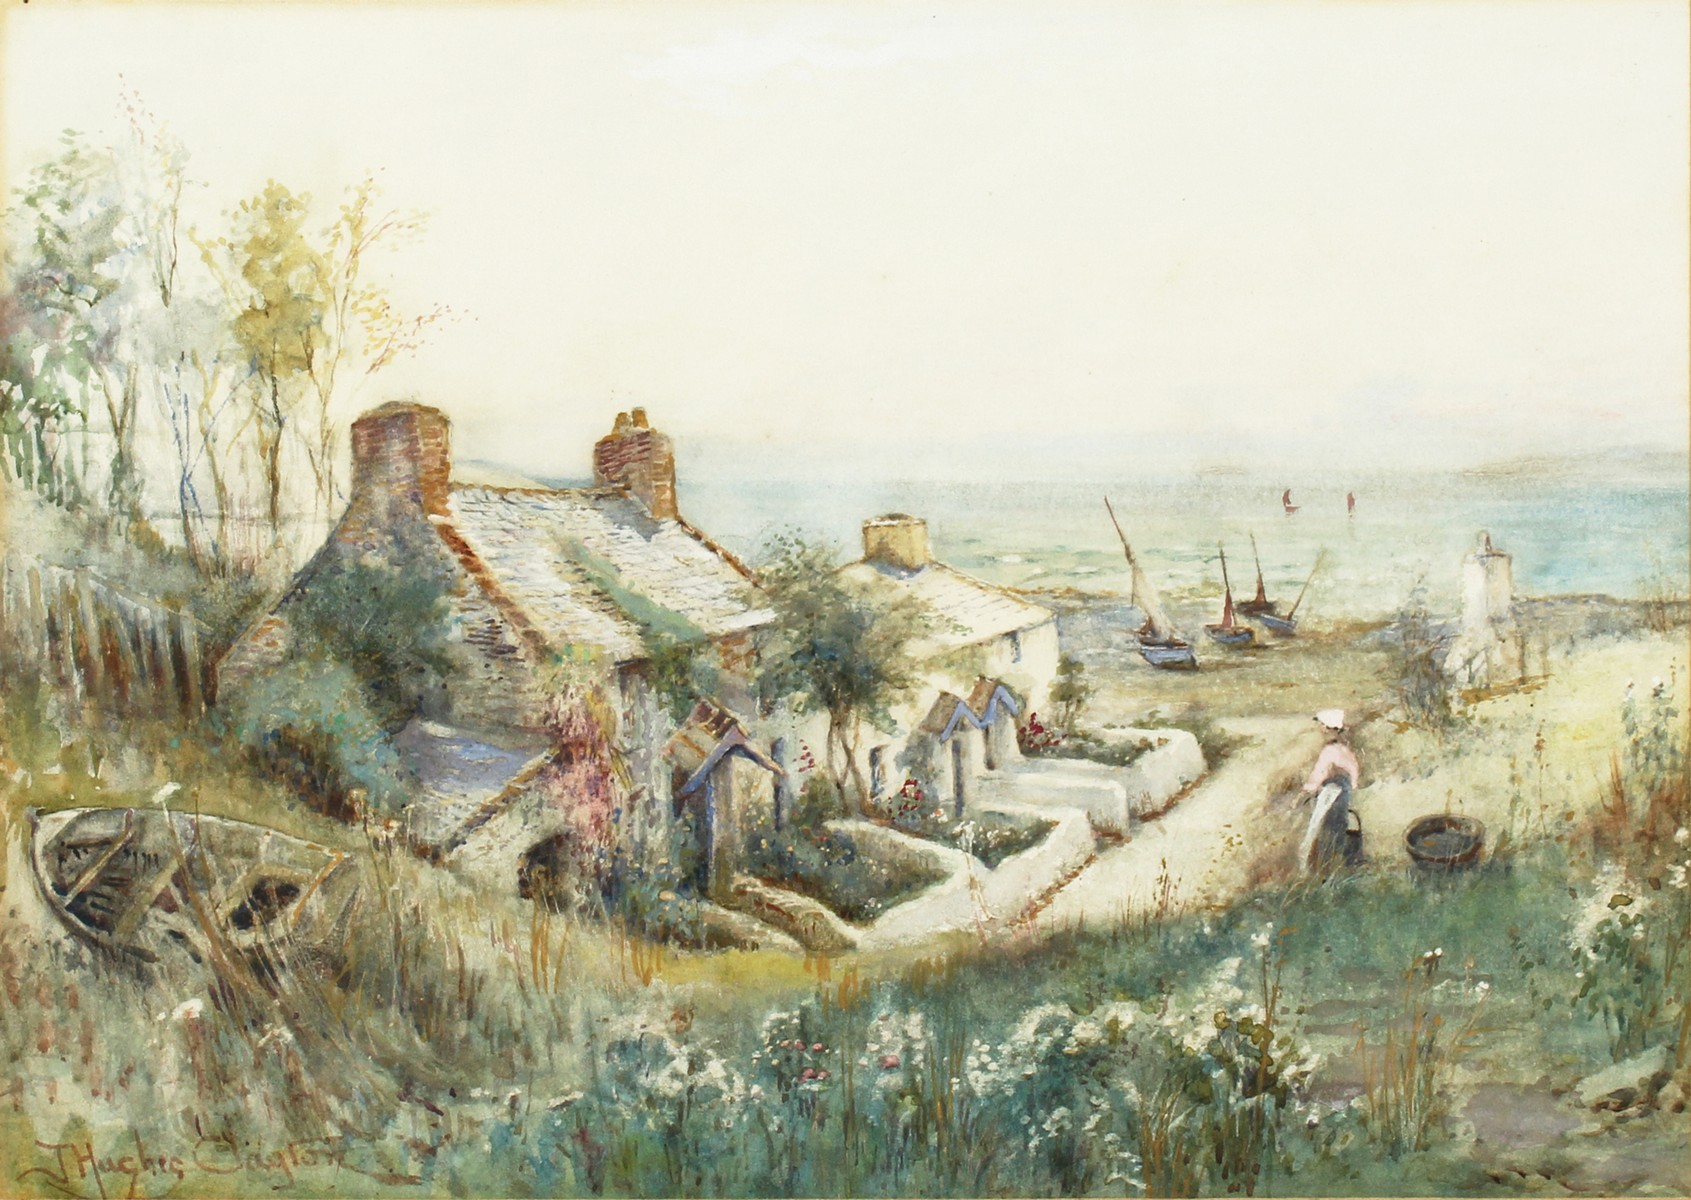 Joseph Hughes Clayton (1870-1930) British. Cottages by the Sea, Watercolour, Signed, 14" x 20".